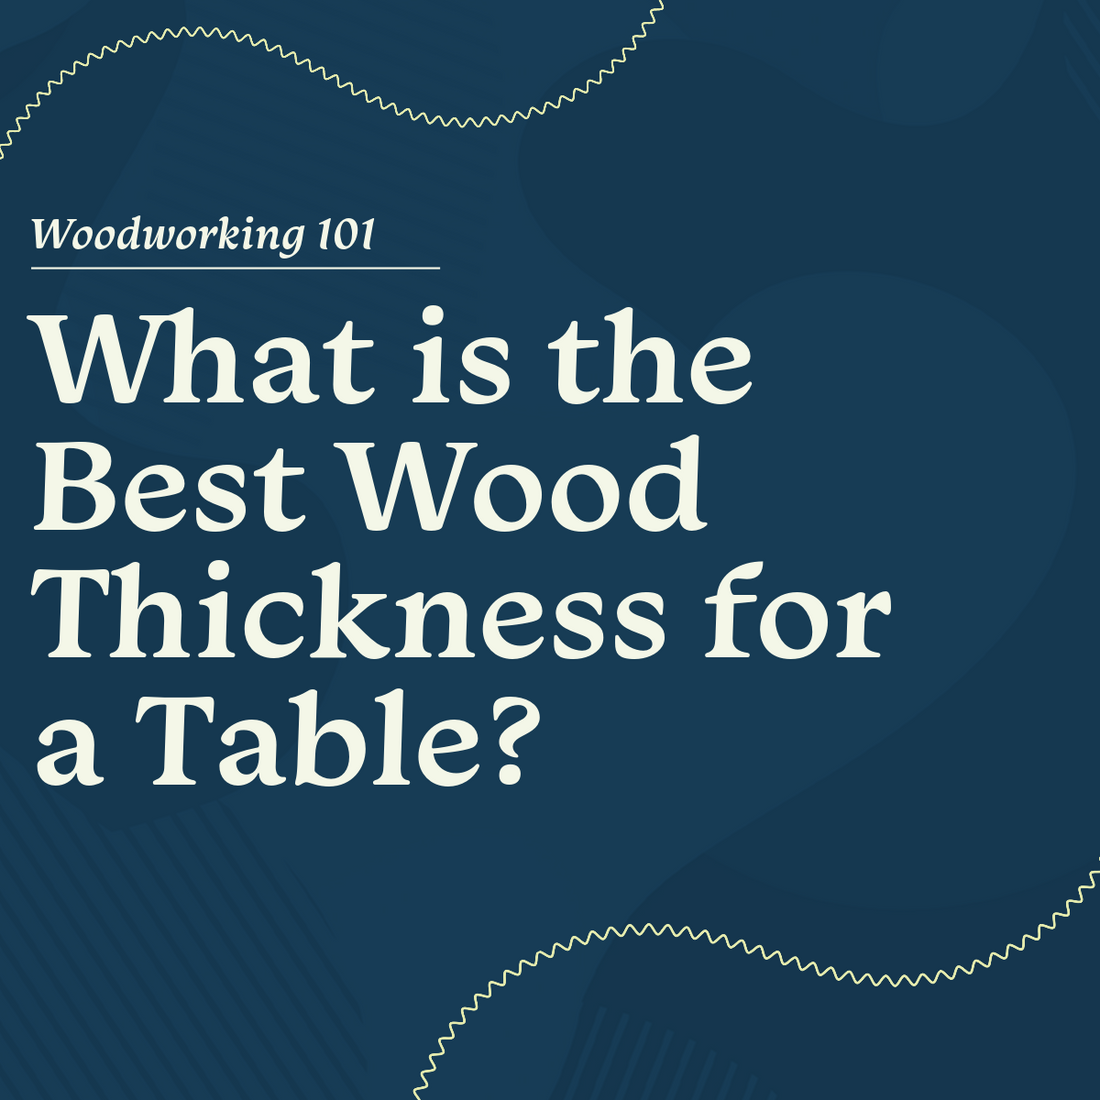 What is the Best Wood Thickness for a Table?